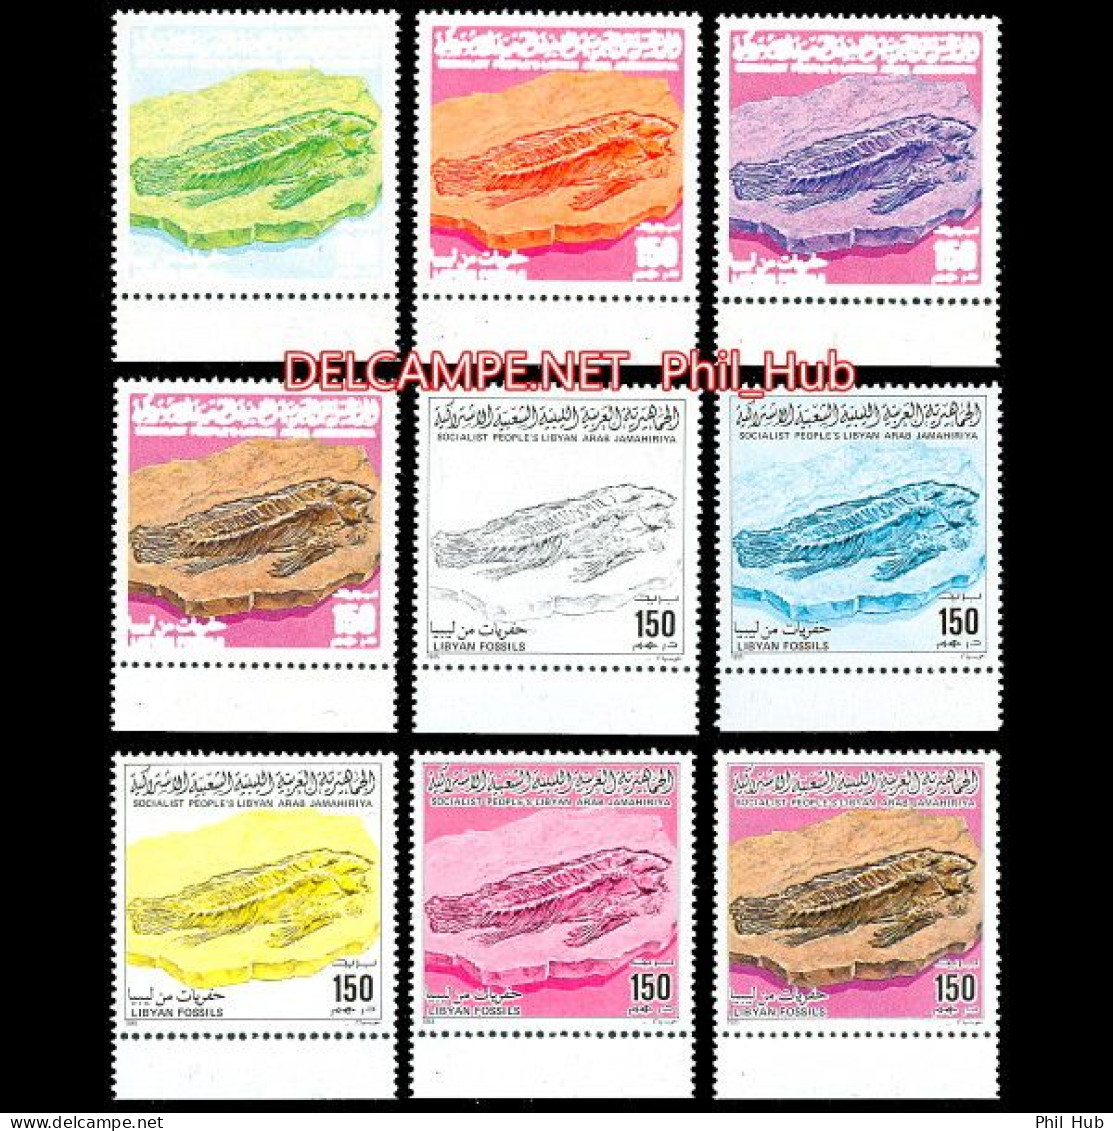 LIBYA 1985 PROOFS Fossils Fishes (9 Color Proofs - Gummed Paper - Perforated) *** BANK TRANSFER ONLY *** - Fossielen